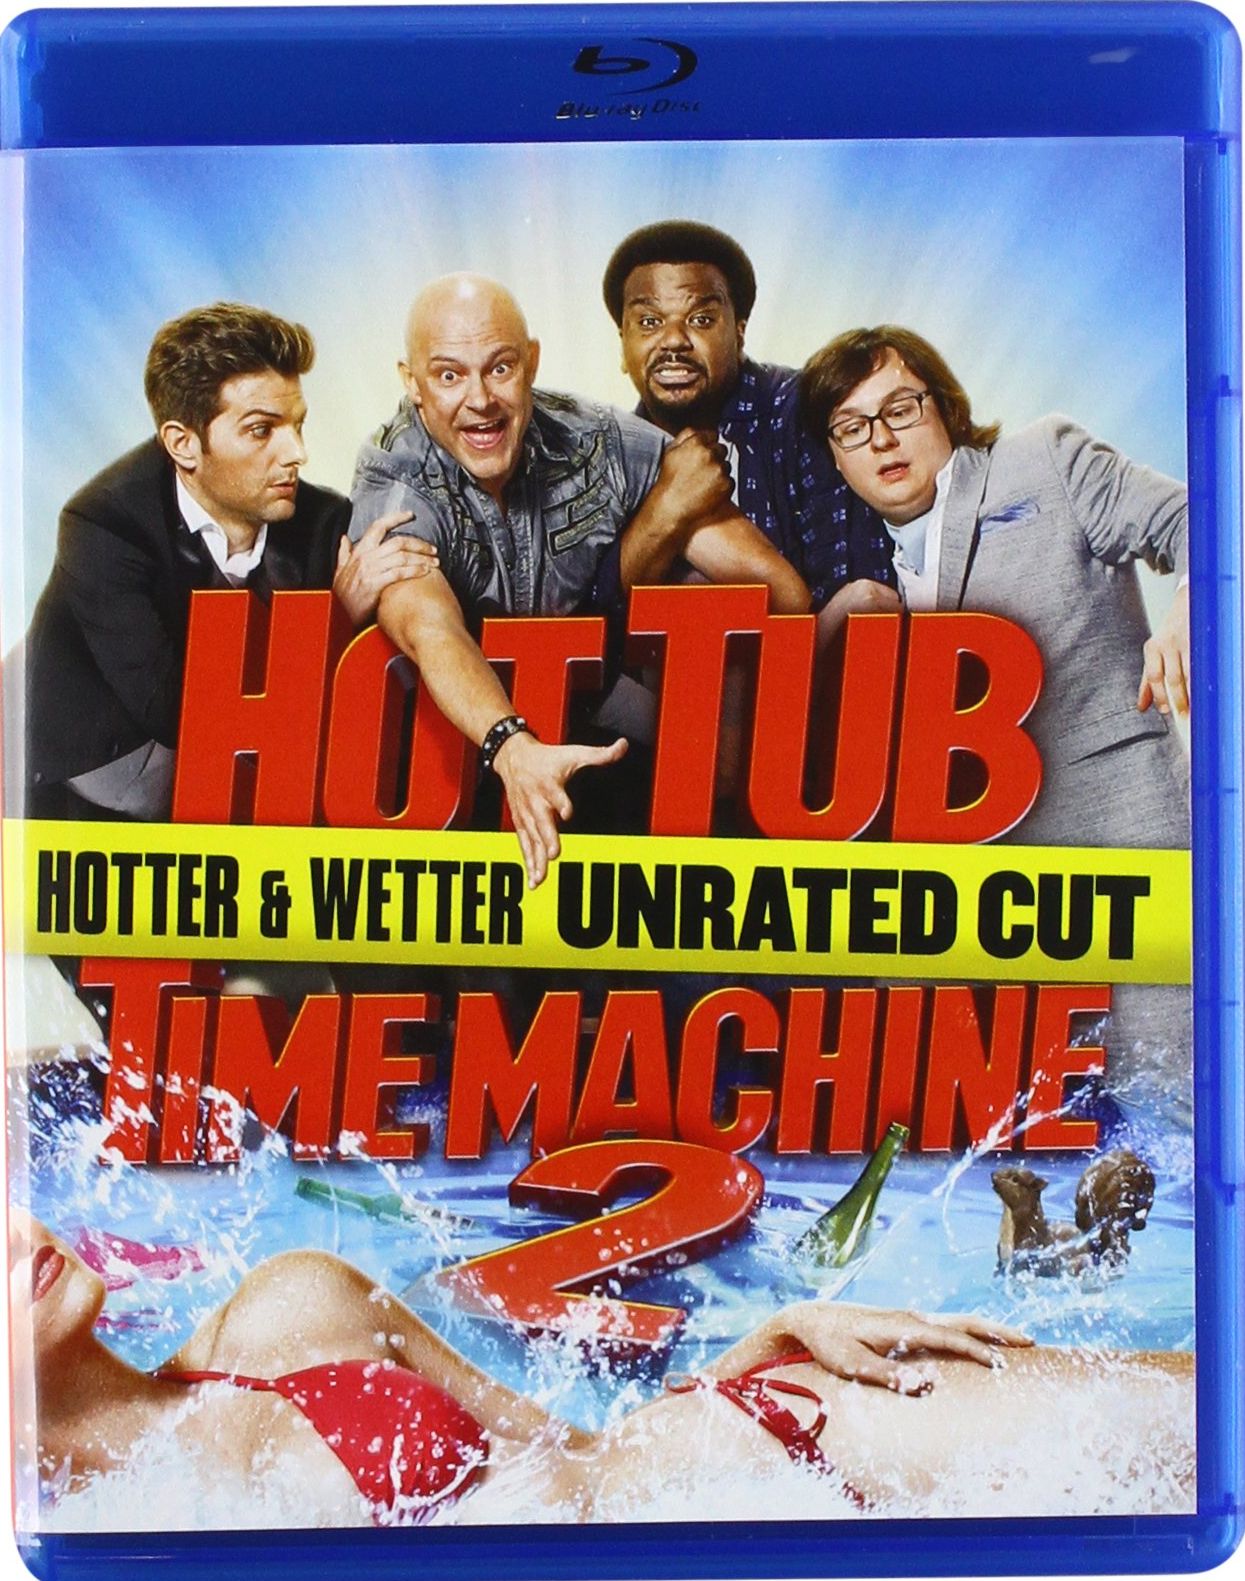 Hot Tub Time Machine 2 Dvd Release Date May 19 2015